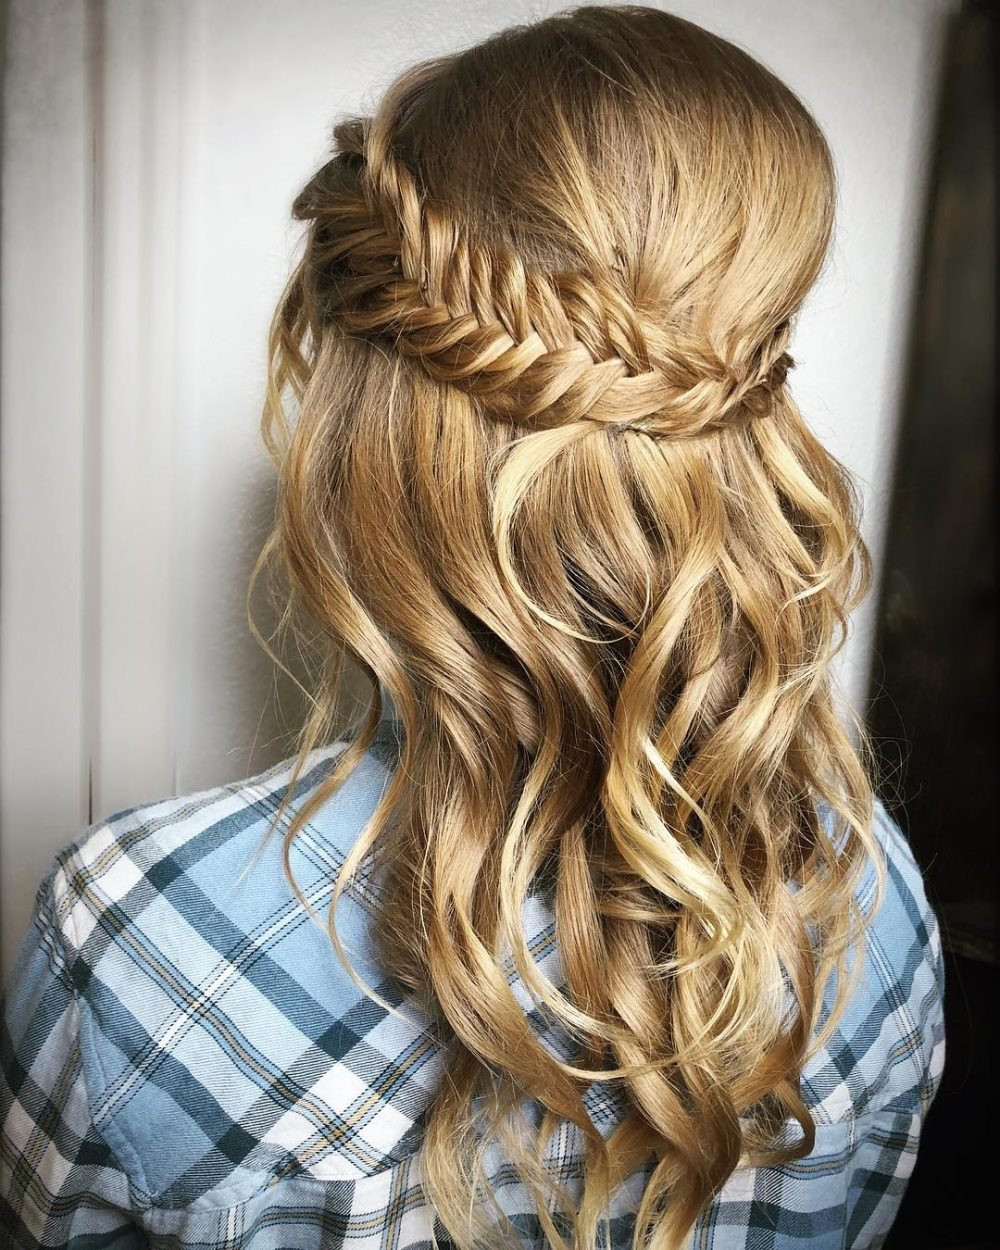 Down Prom Hairstyles
 Half Up Half Down Prom Hairstyles and How To s